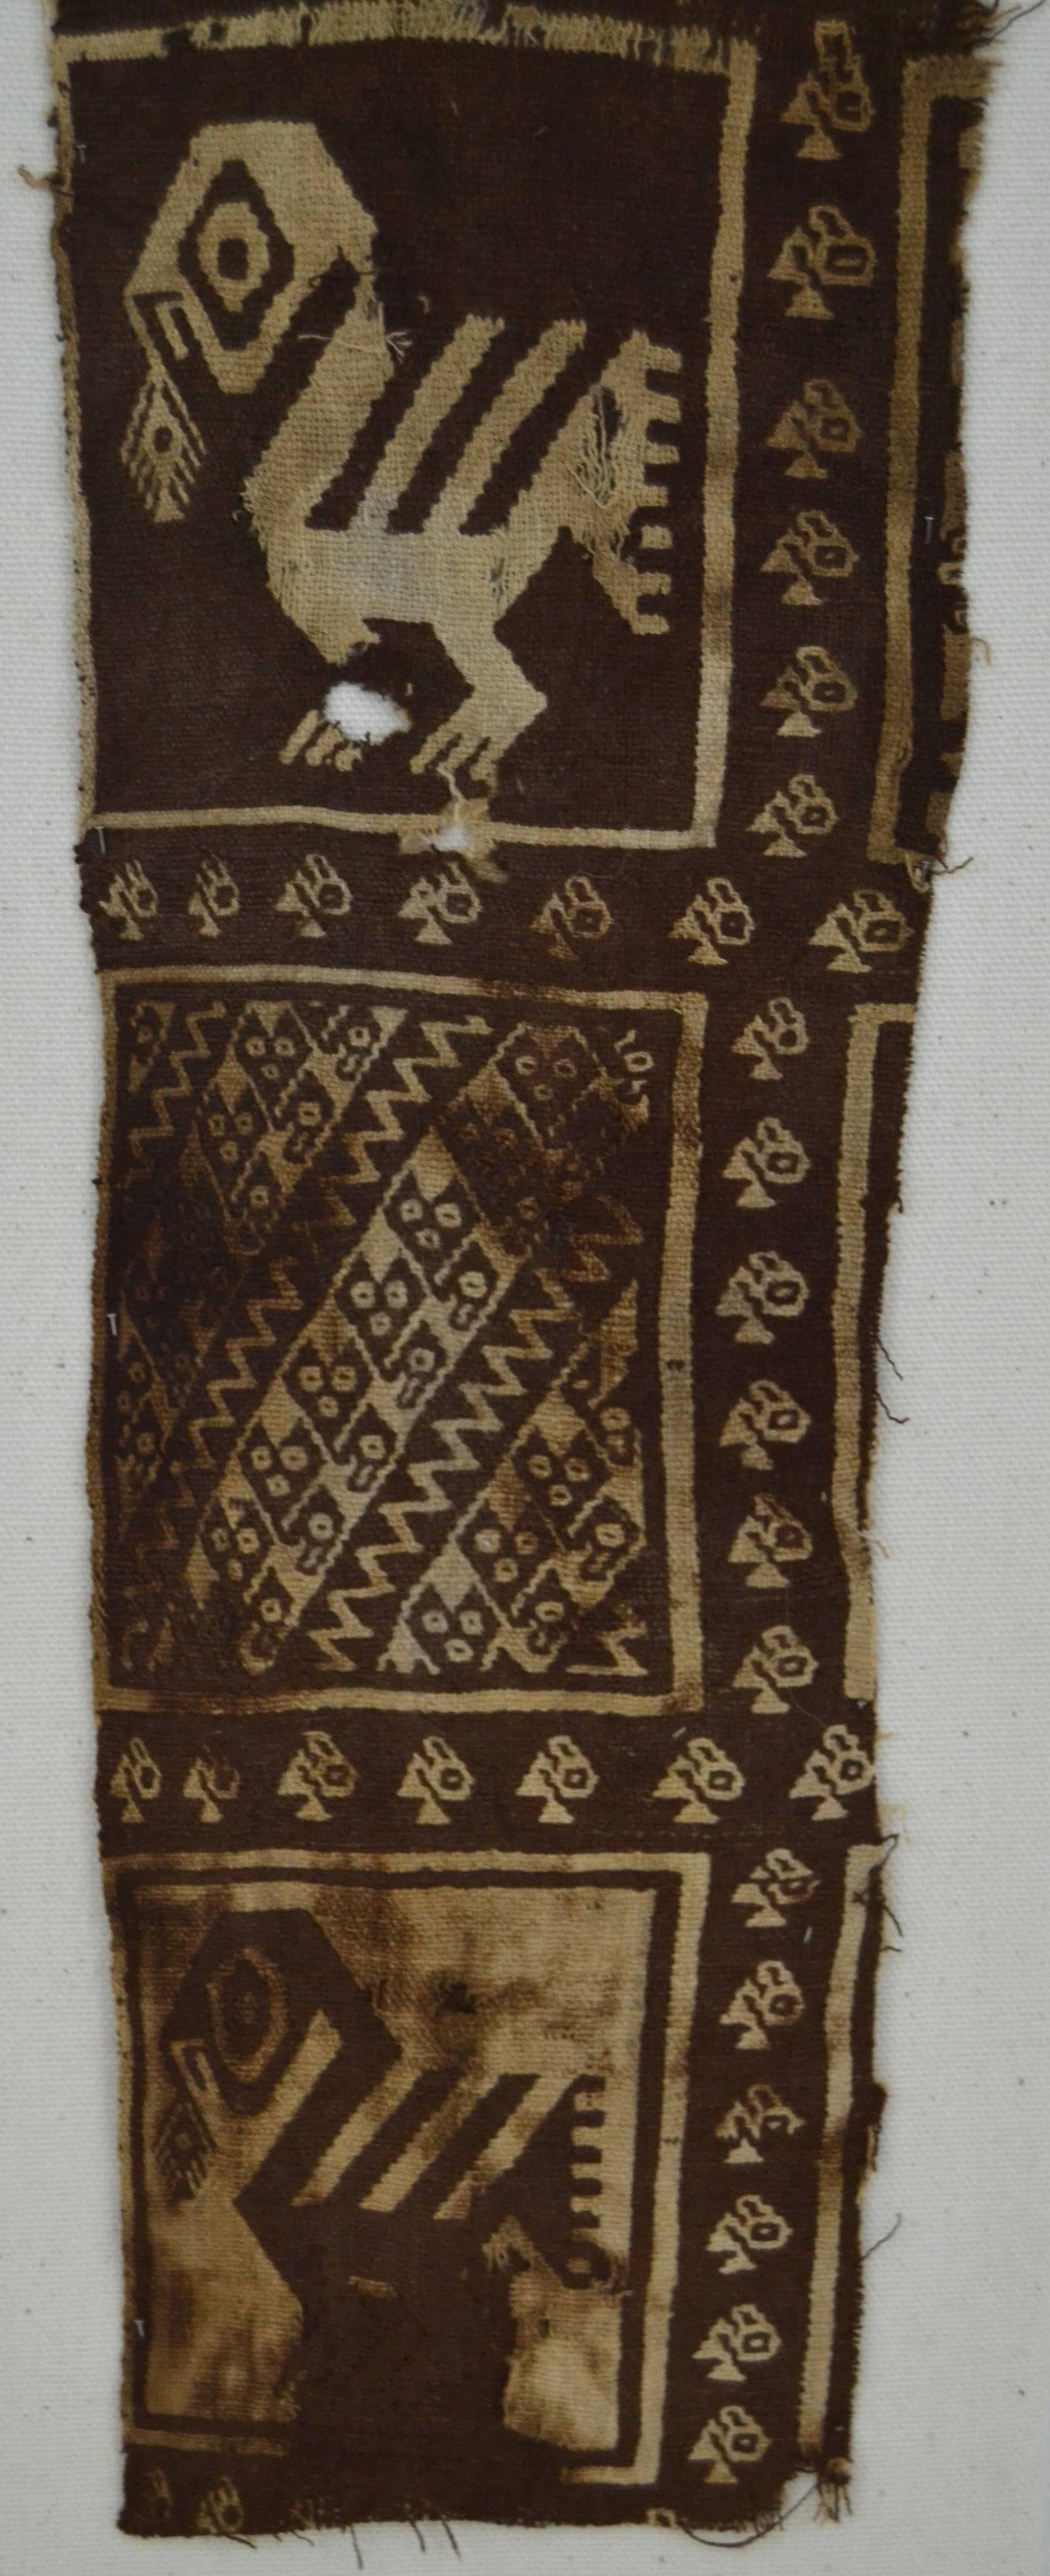 Brown and natural woven (cotton) textile fragment depicting birds and feline figures, Chimu culture, fragment size 17" x 4.5", mounted and pinned on linen.